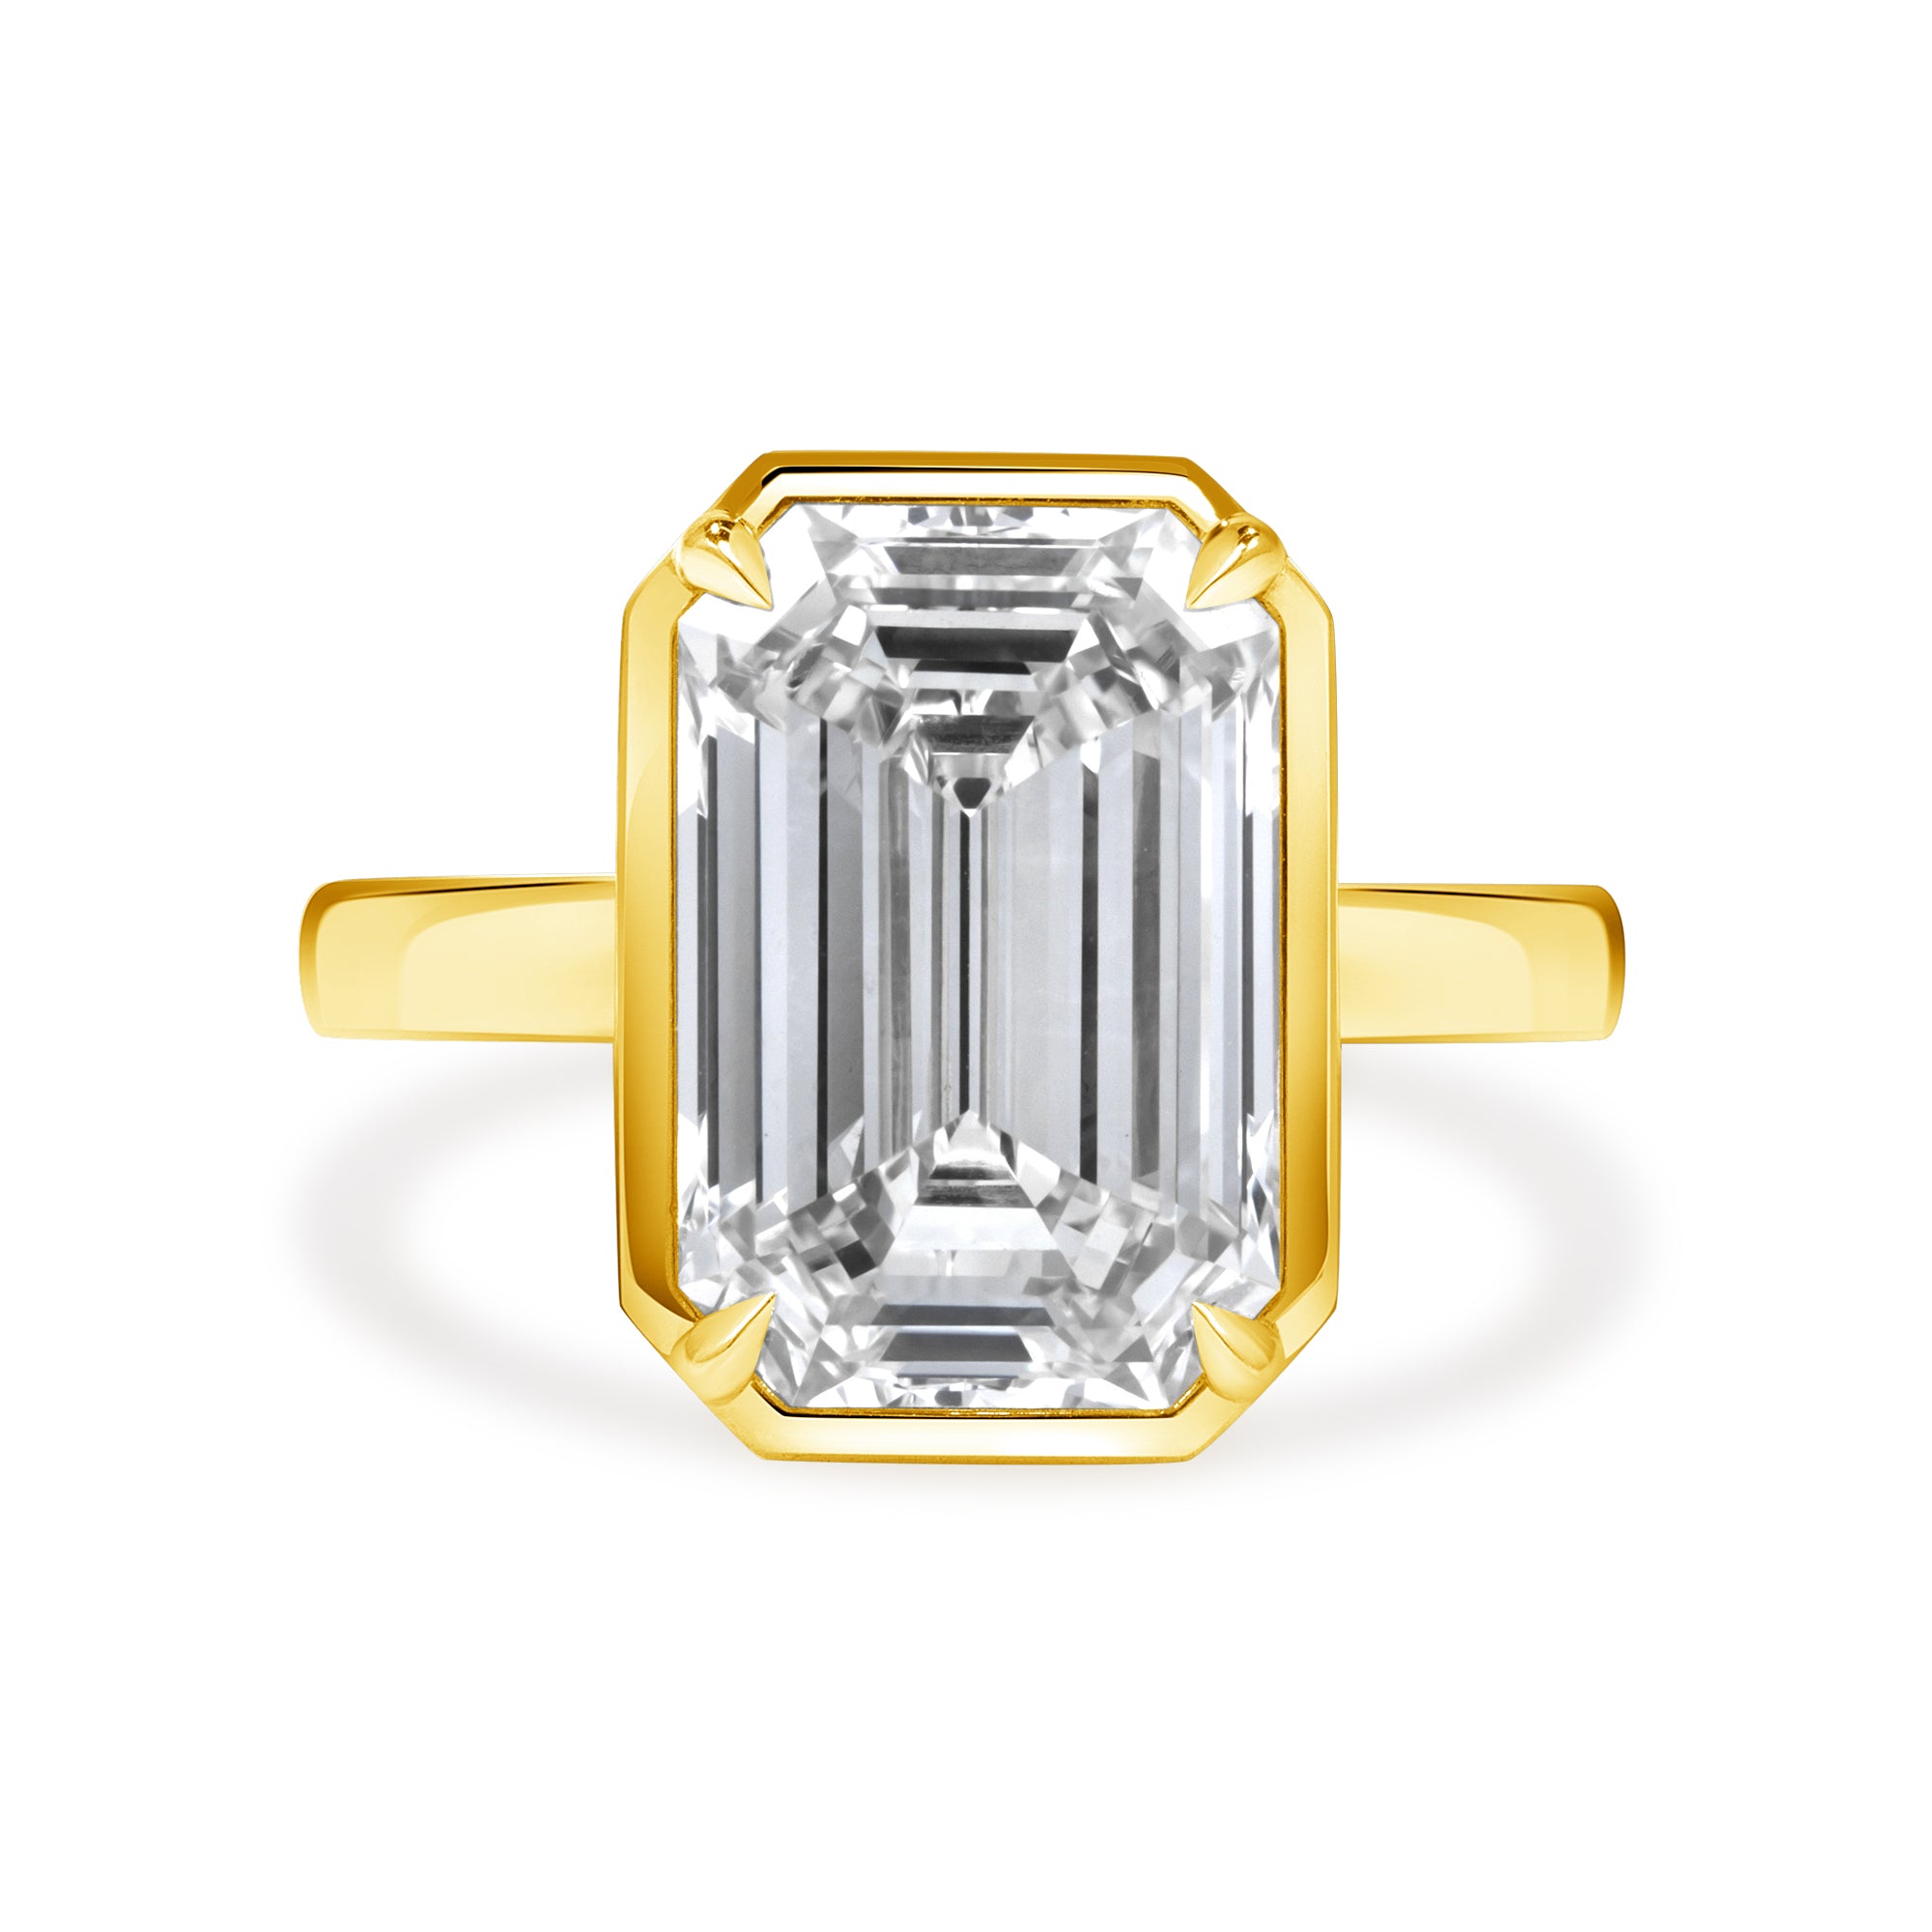 5.27ct Emerald Cut Diamond Solitaire Ring, Bezel Set with 18k Yellow Gold Band, GIA Certified